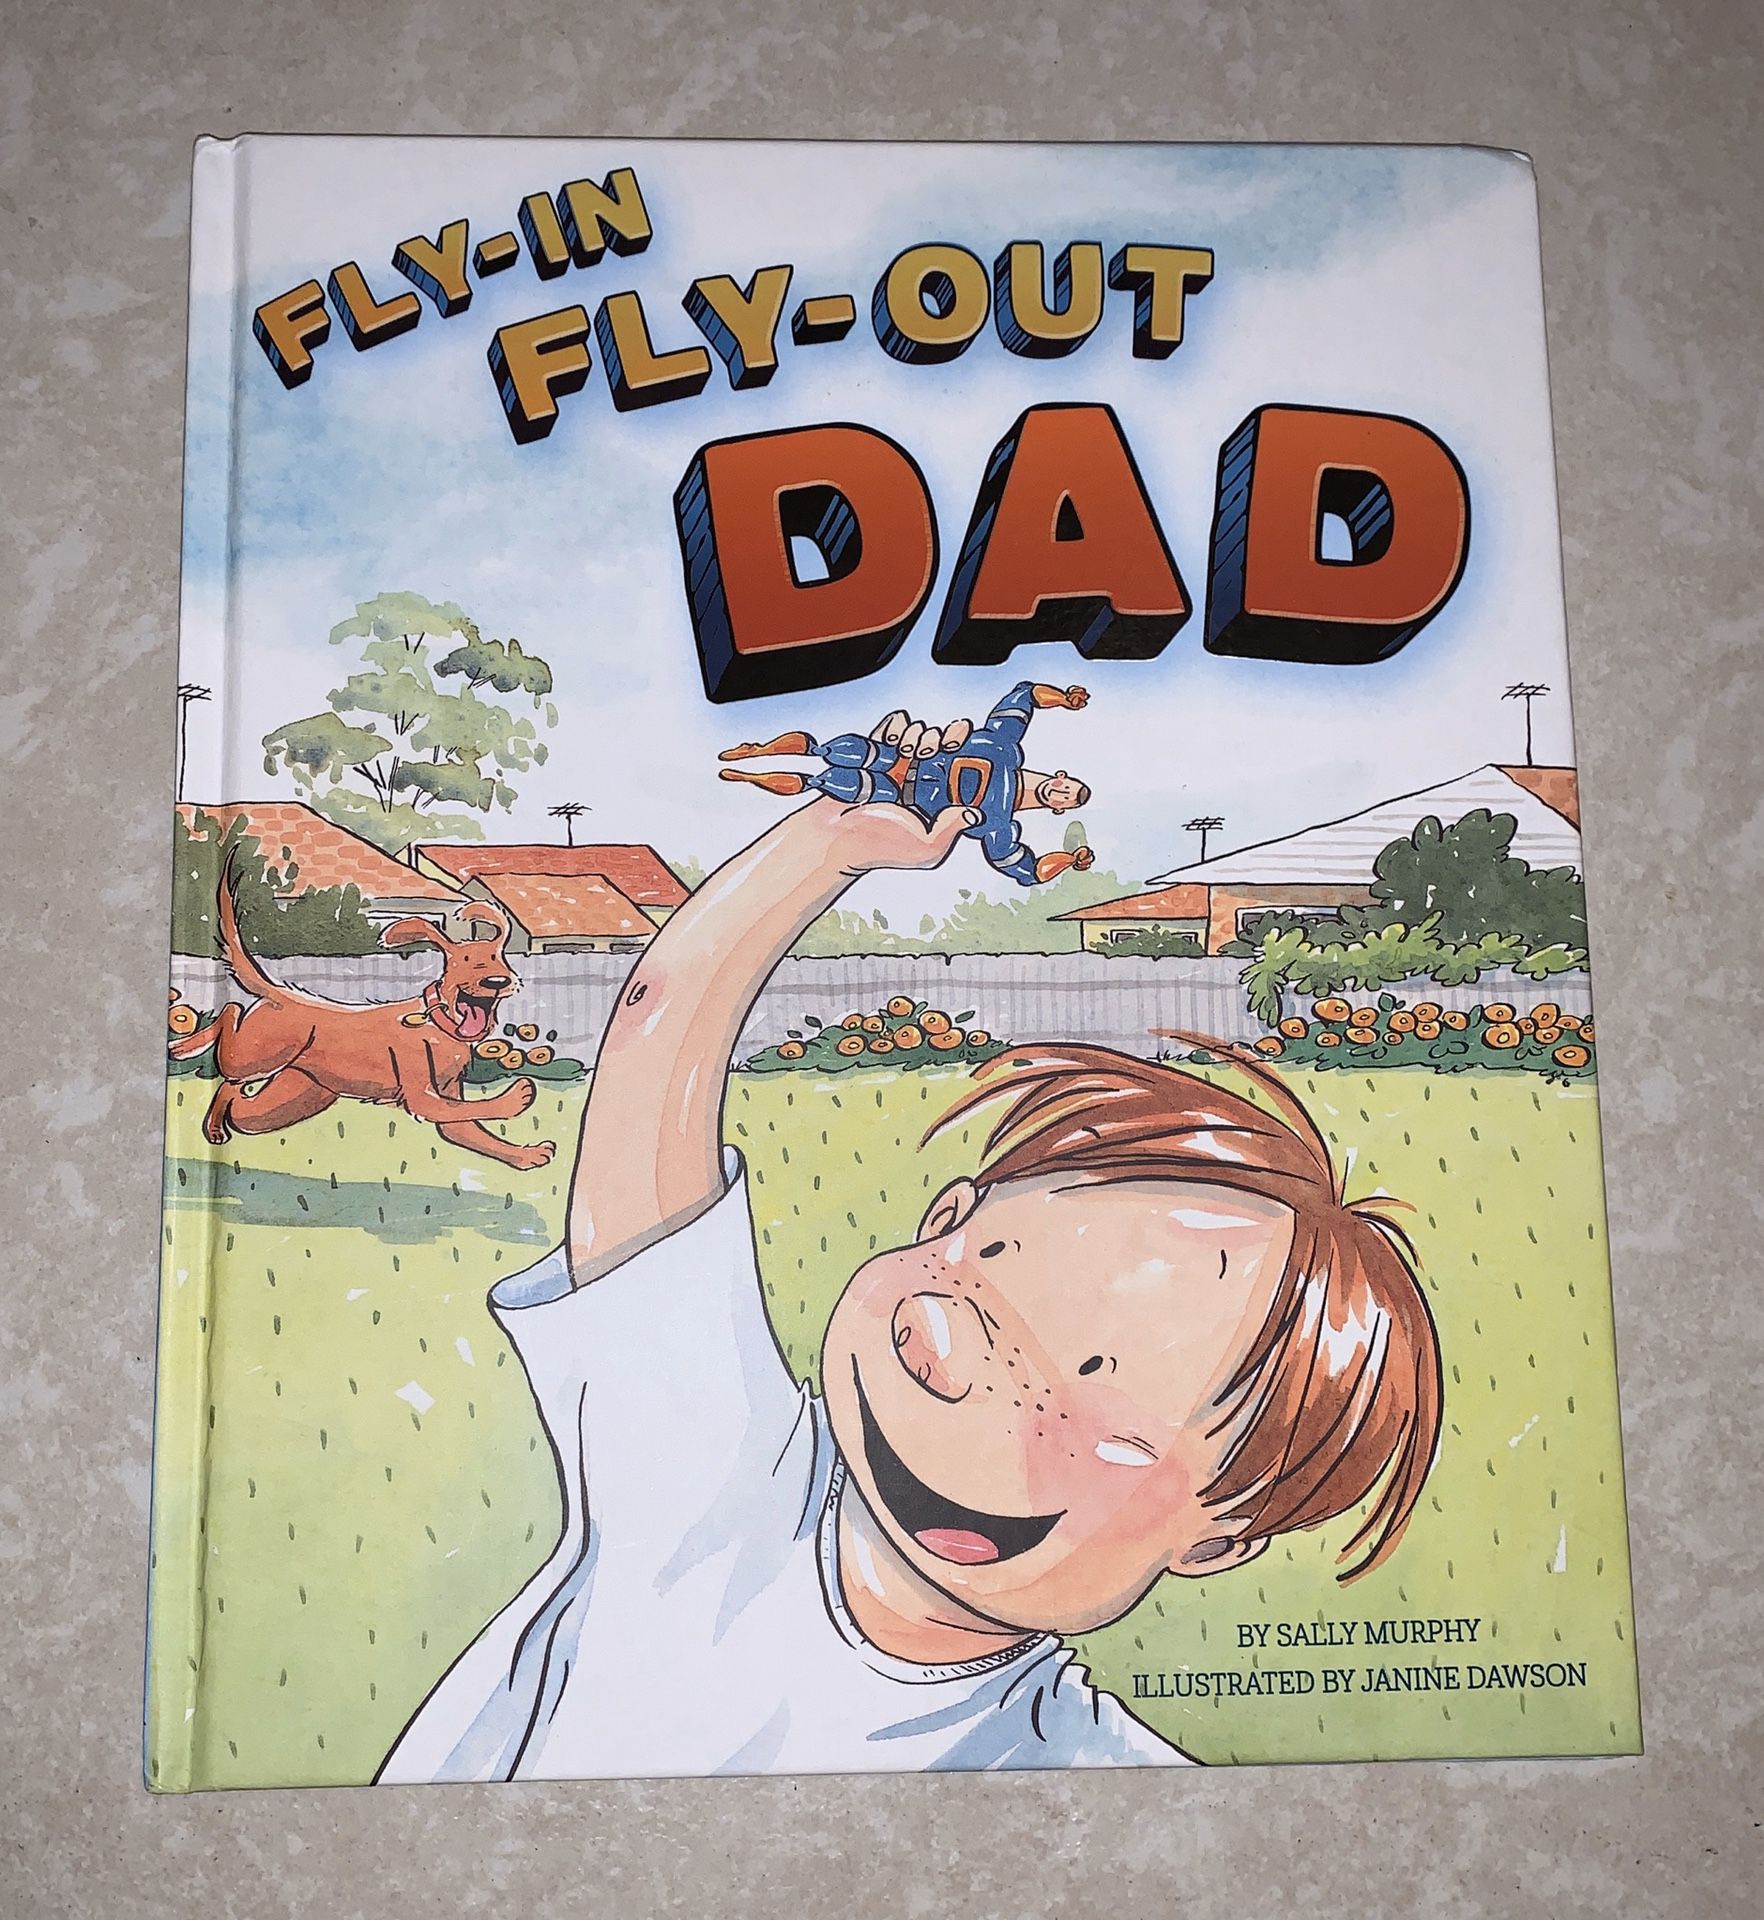 Brand new large hardcover kids book, Fly-In Fly-Out Dad by Sally Murphy